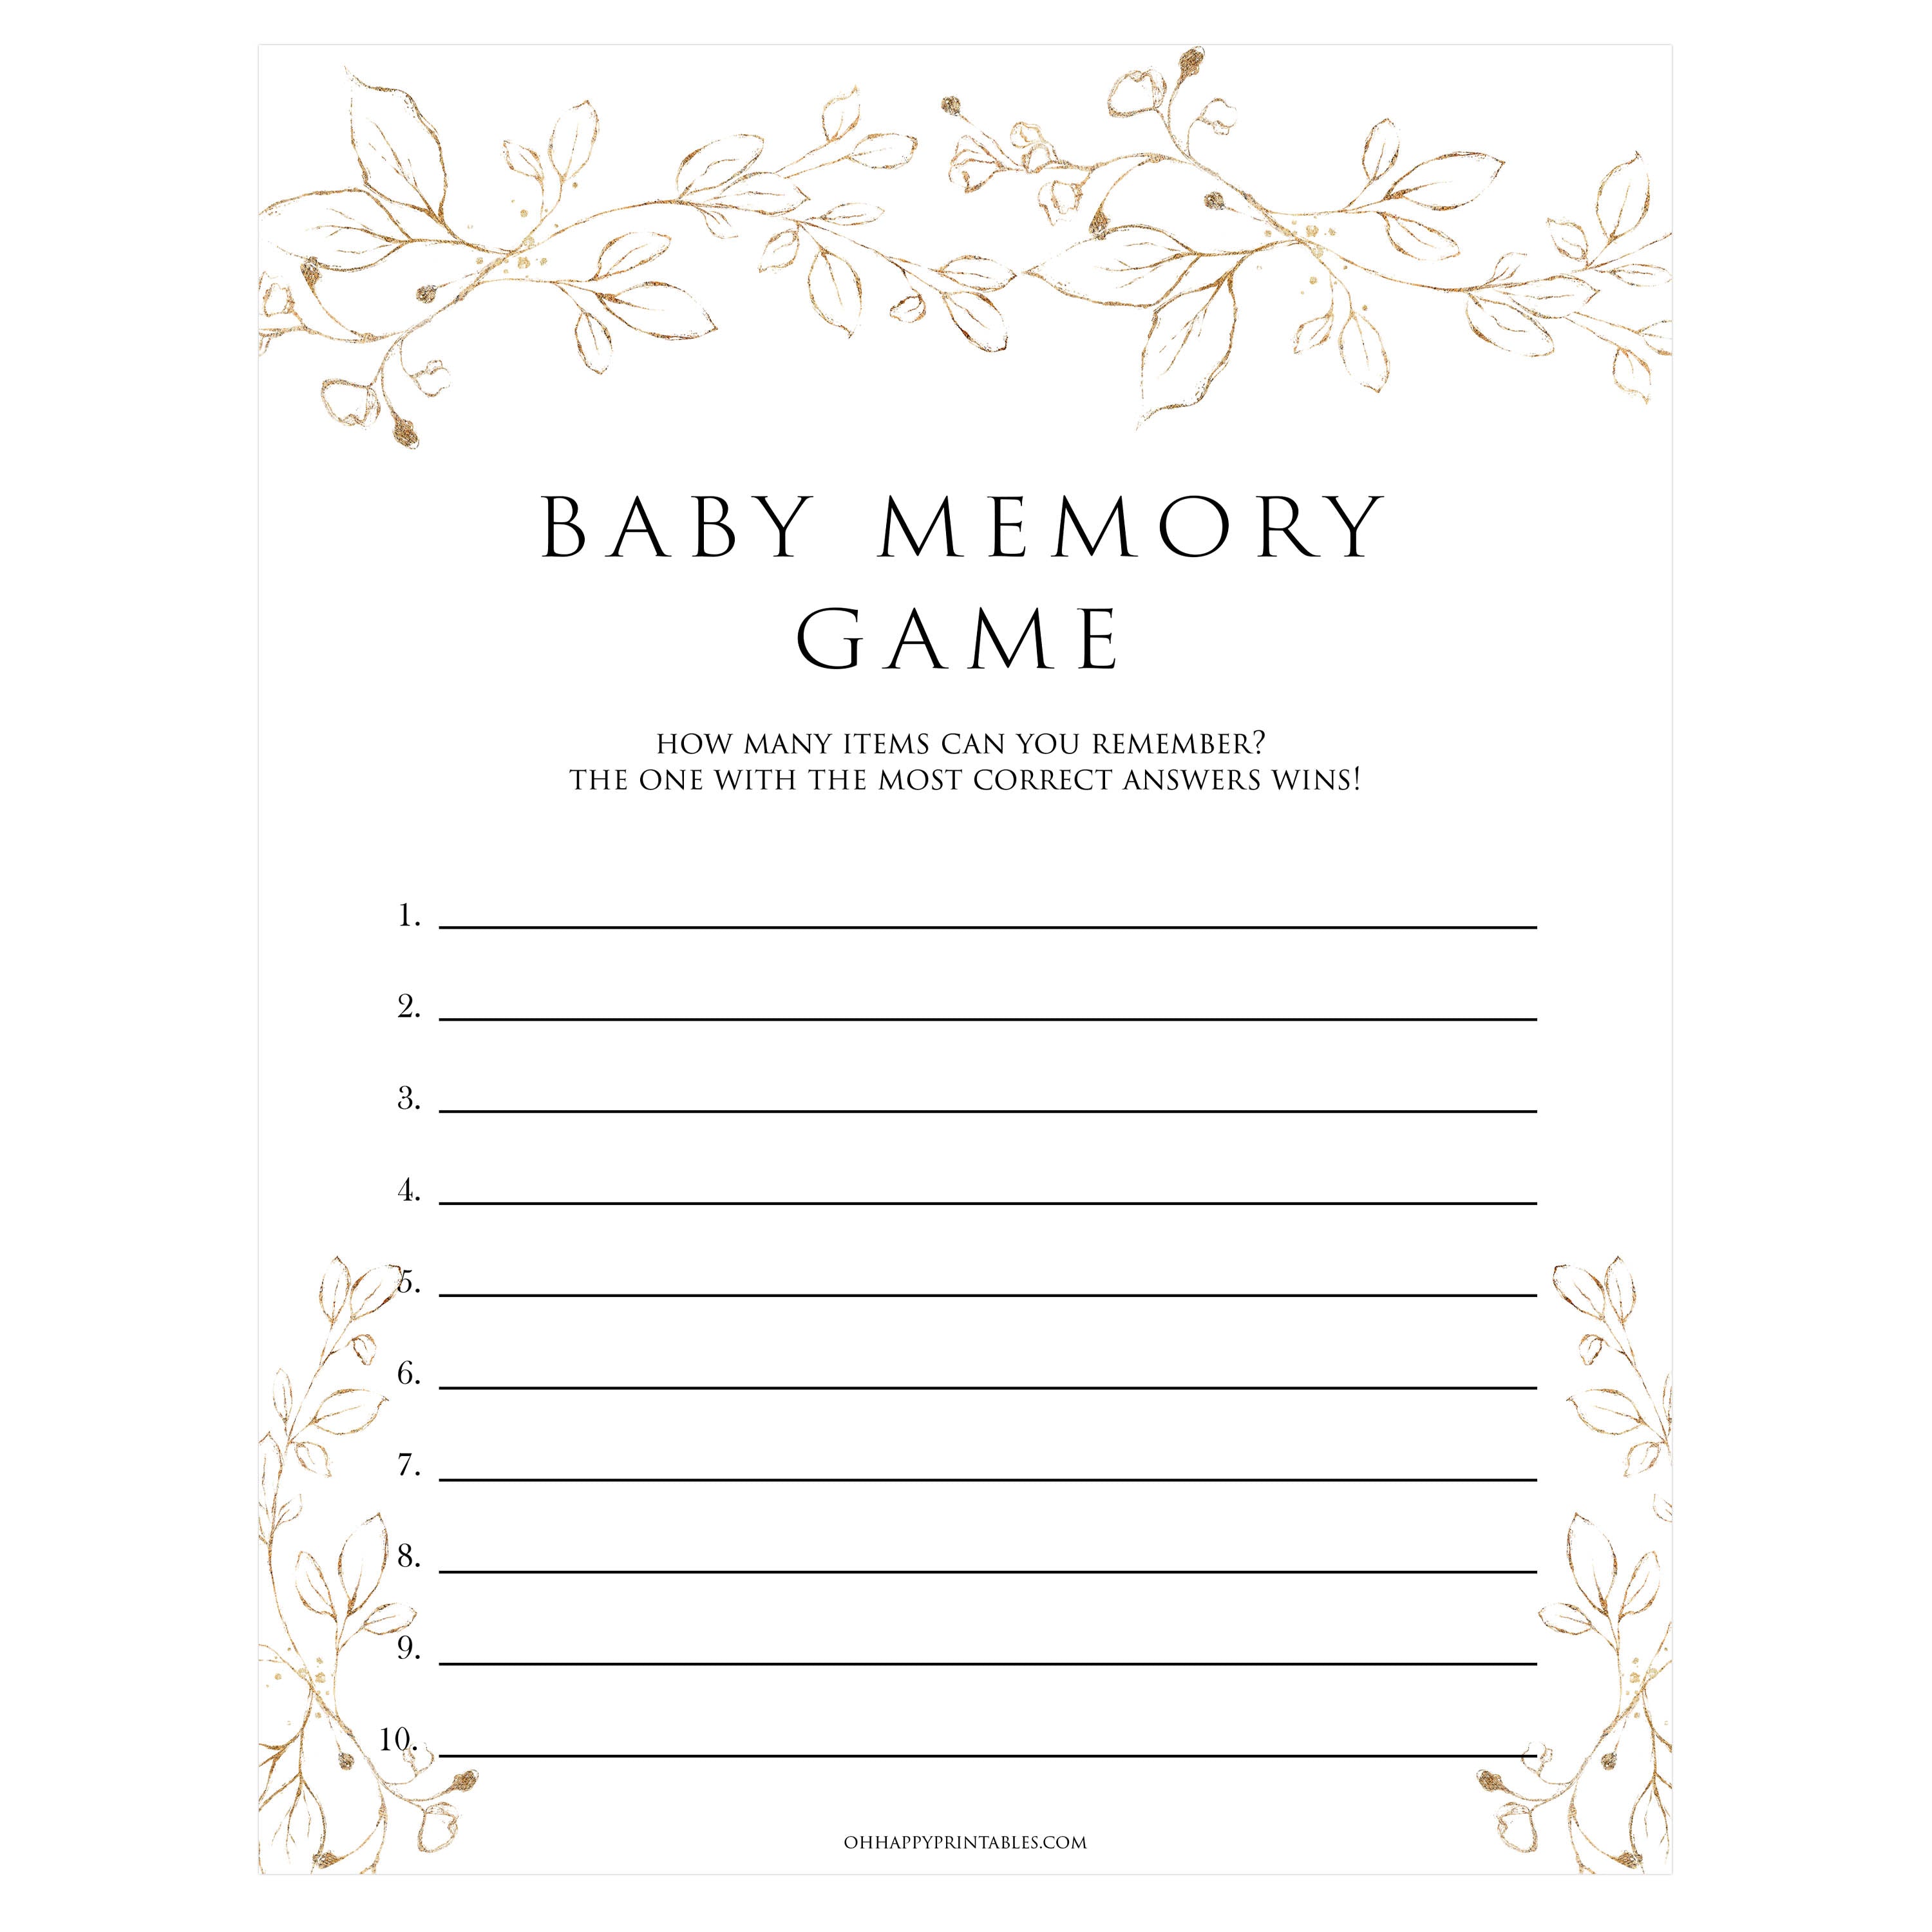 baby memory game, Printable baby shower games, gold leaf baby games, baby shower games, fun baby shower ideas, top baby shower ideas, gold leaf baby shower, baby shower games, fun gold leaf baby shower ideas